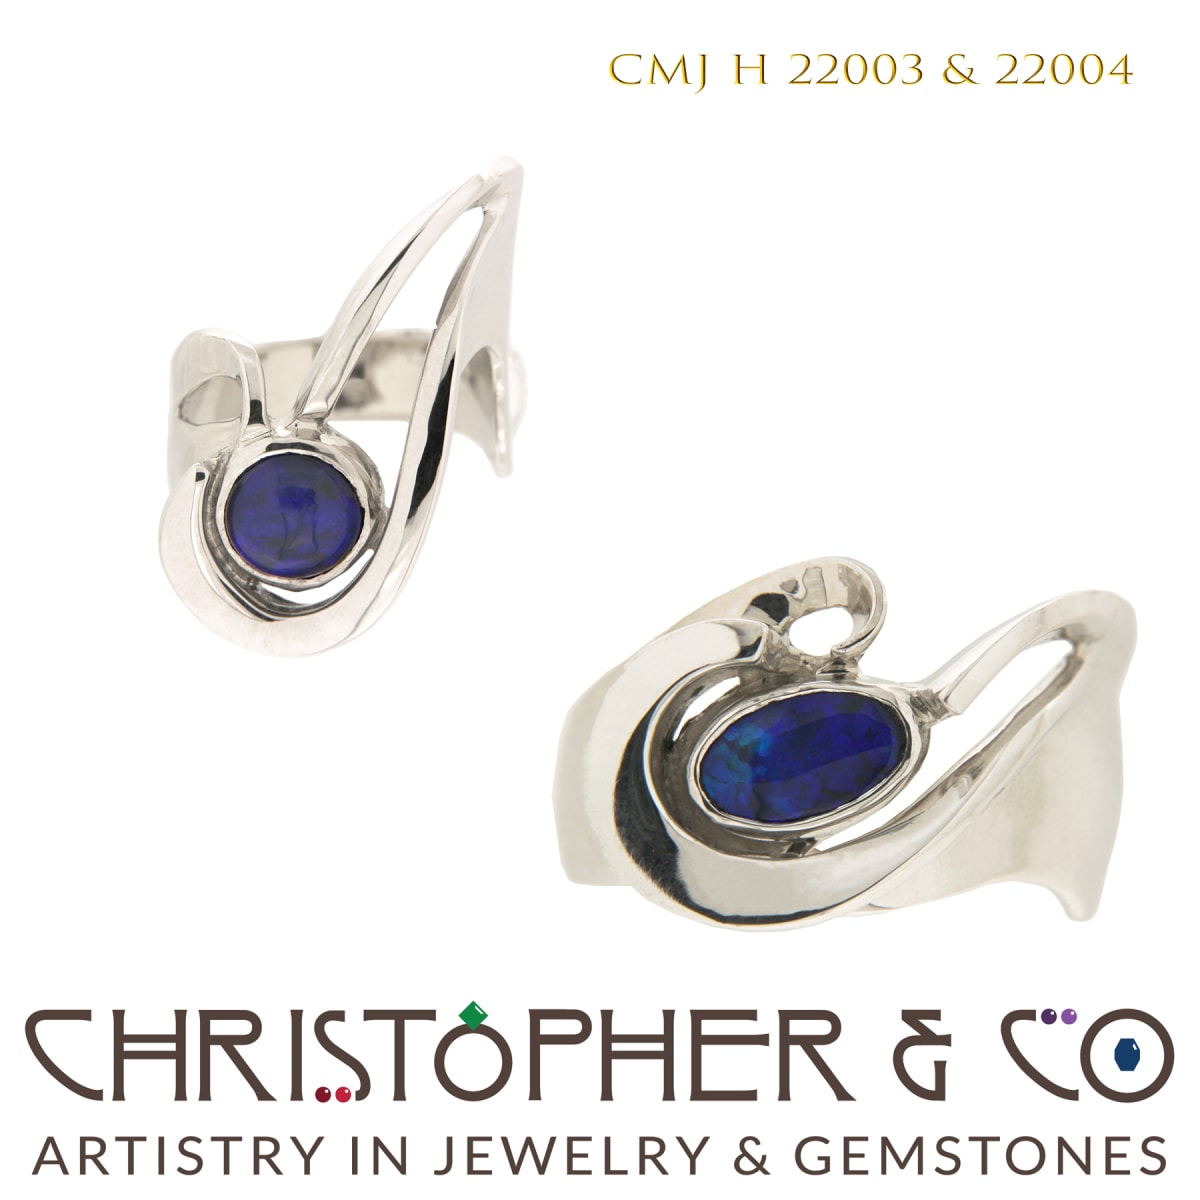 CMJ H 22003 & 22004  White gold wedding rings designed by Christopher M. Jupp and set with black opal cabachon. by Christopher M. Jupp  Image: CMJ H 22003 & 22004  White gold wedding rings designed by Christopher M. Jupp and set with black opal cabachon.